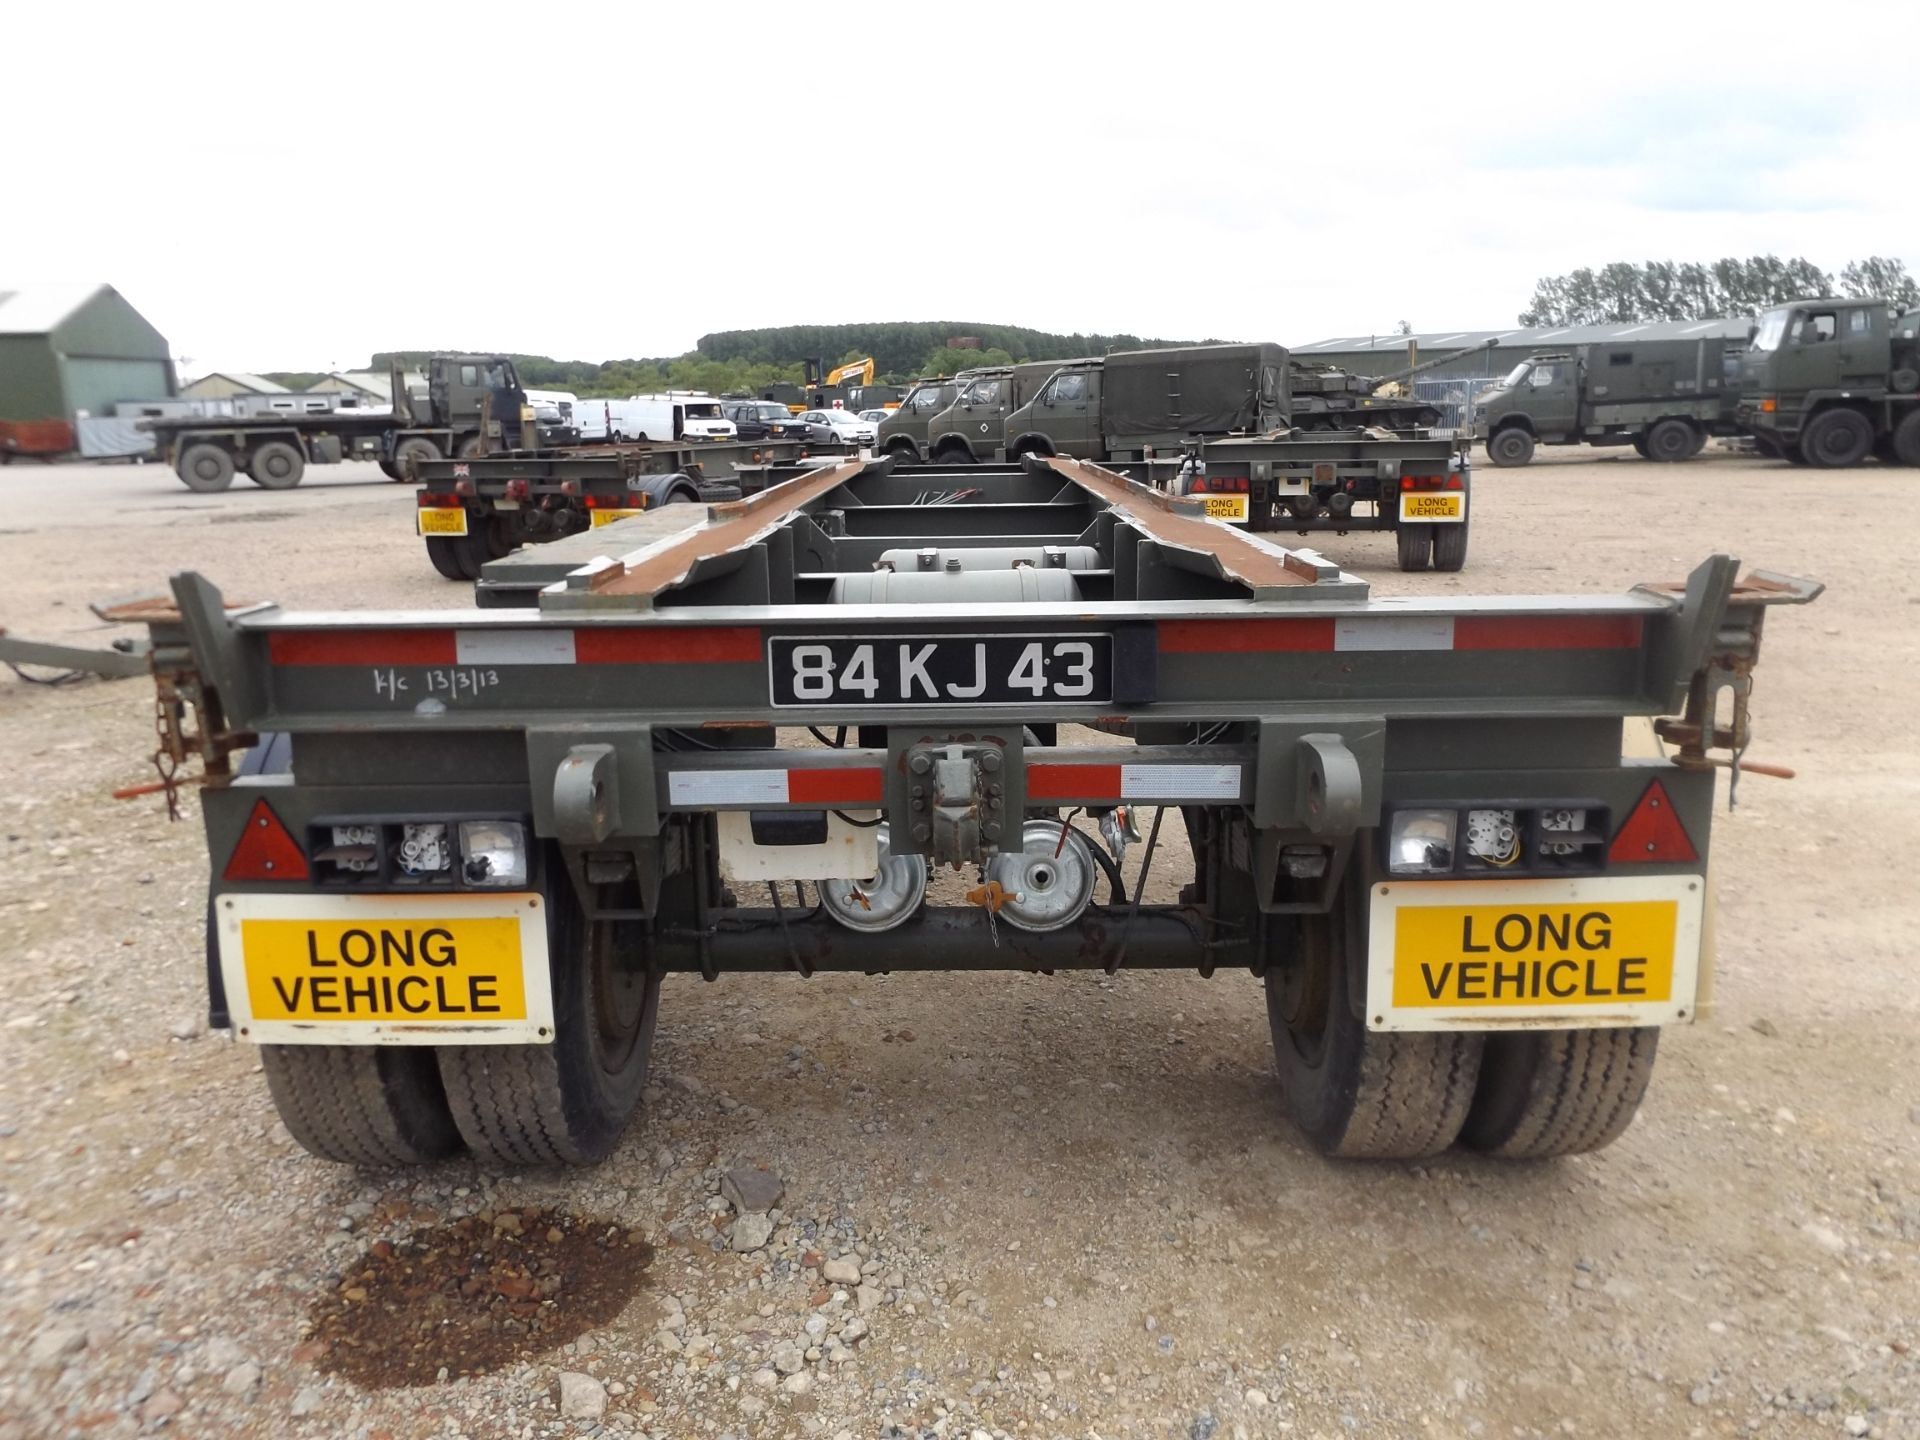 King DB 2 Axle 15 Tonne Skeletal drops/skip/container Trailer - Image 2 of 10